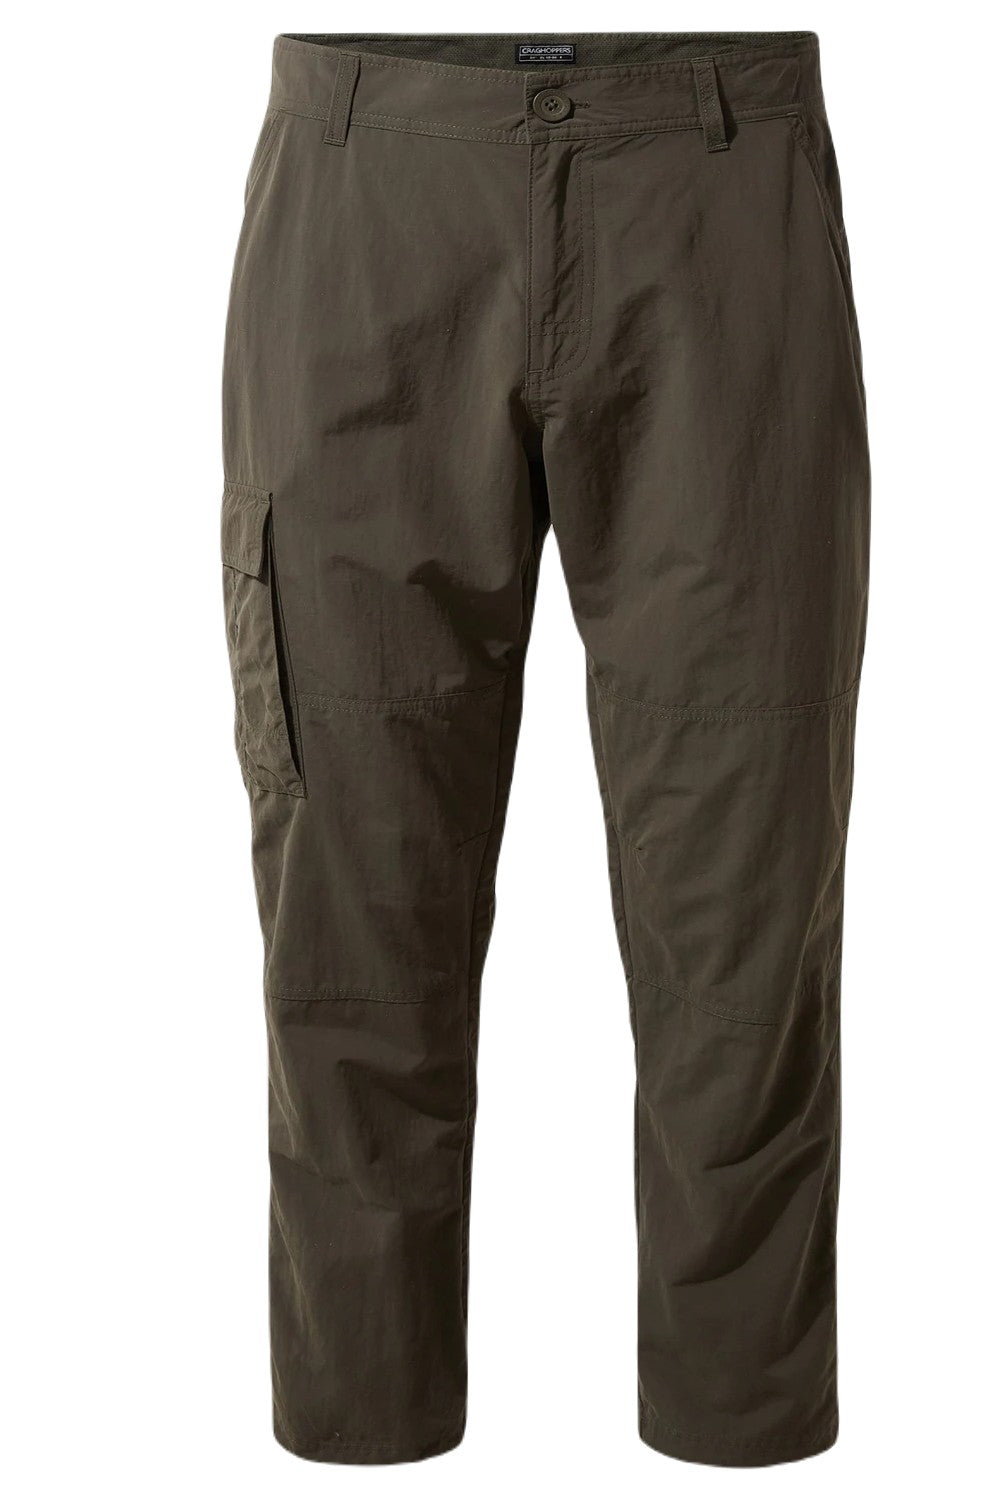 Mens NosiLife Pro Active Trousers  Pebble  Craghoppers ROW